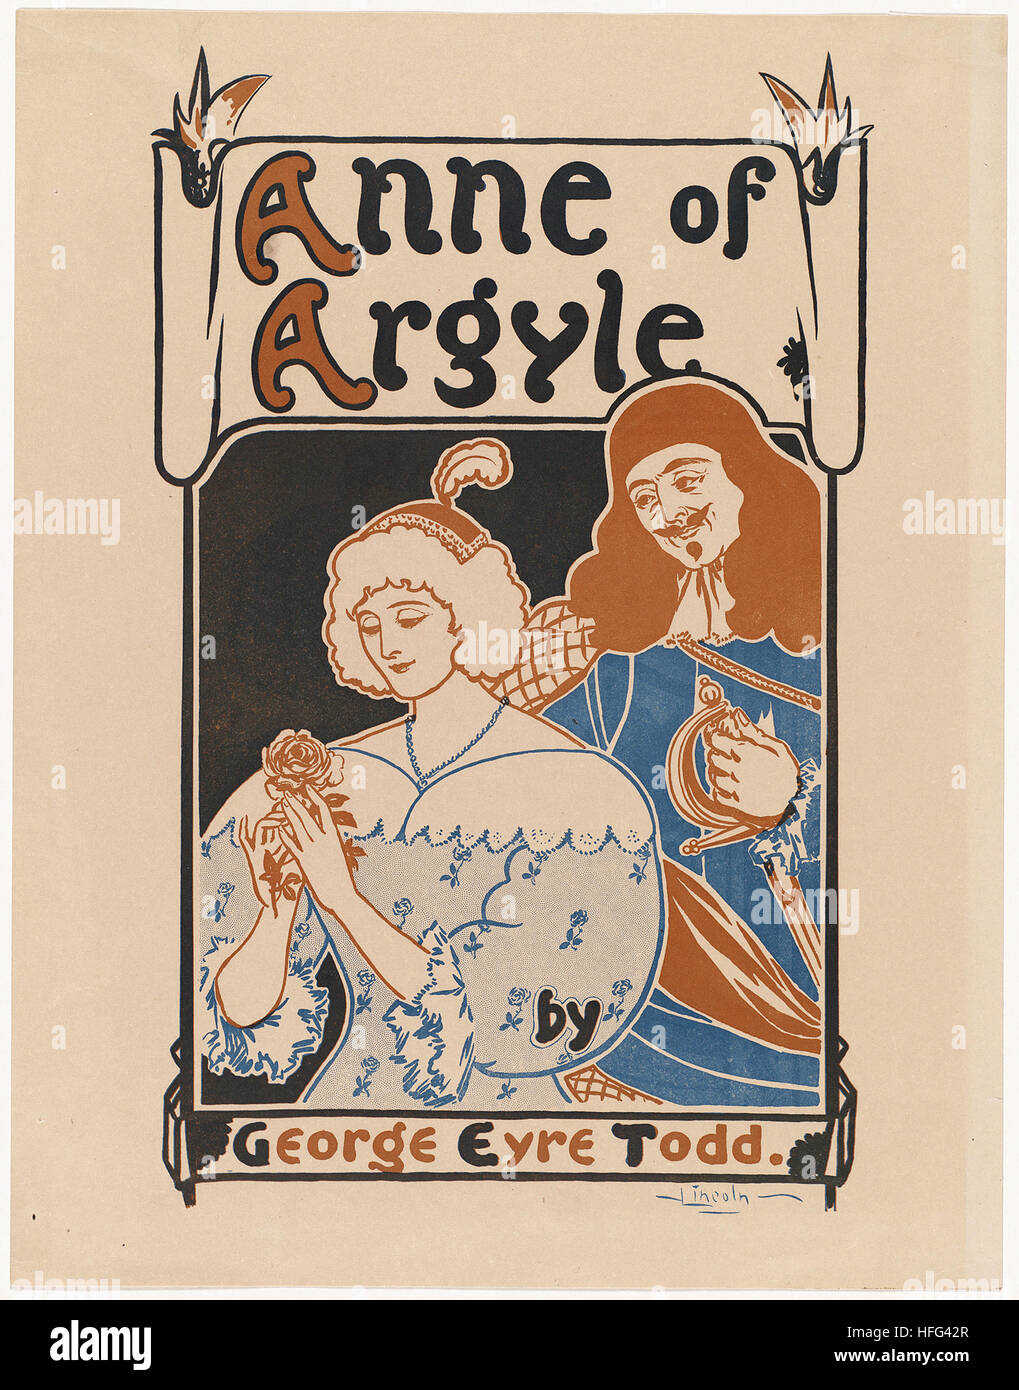 Anne of Argyle by George Eyre Todd. Stock Photo